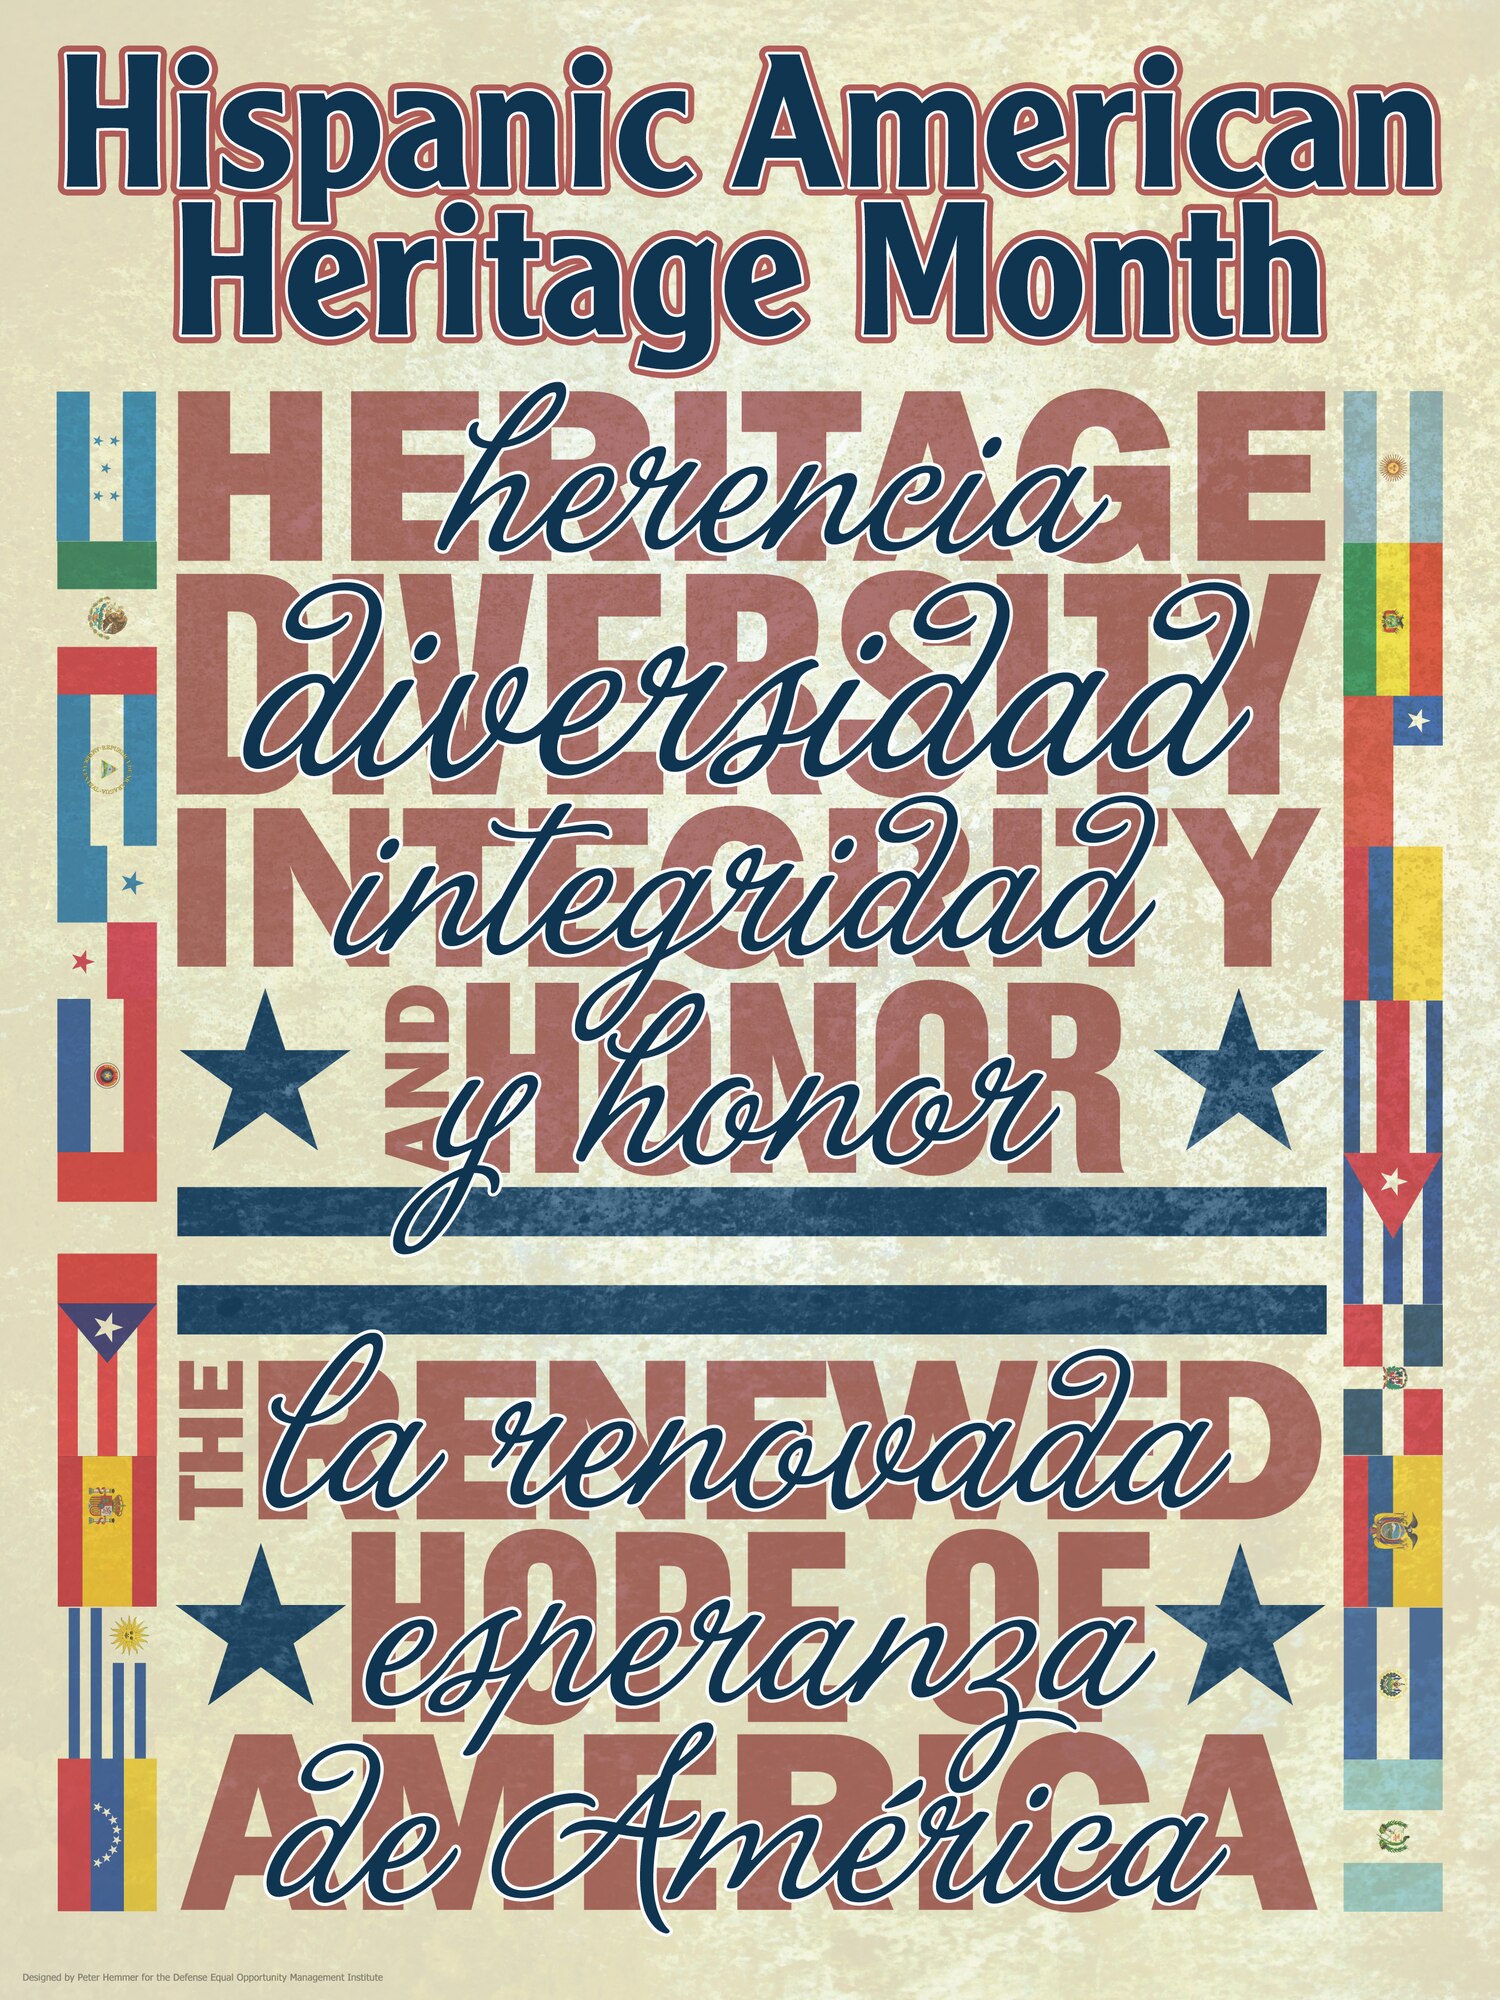 Equal Opportunity Office spreads the word about Hispanic American Heritage Month